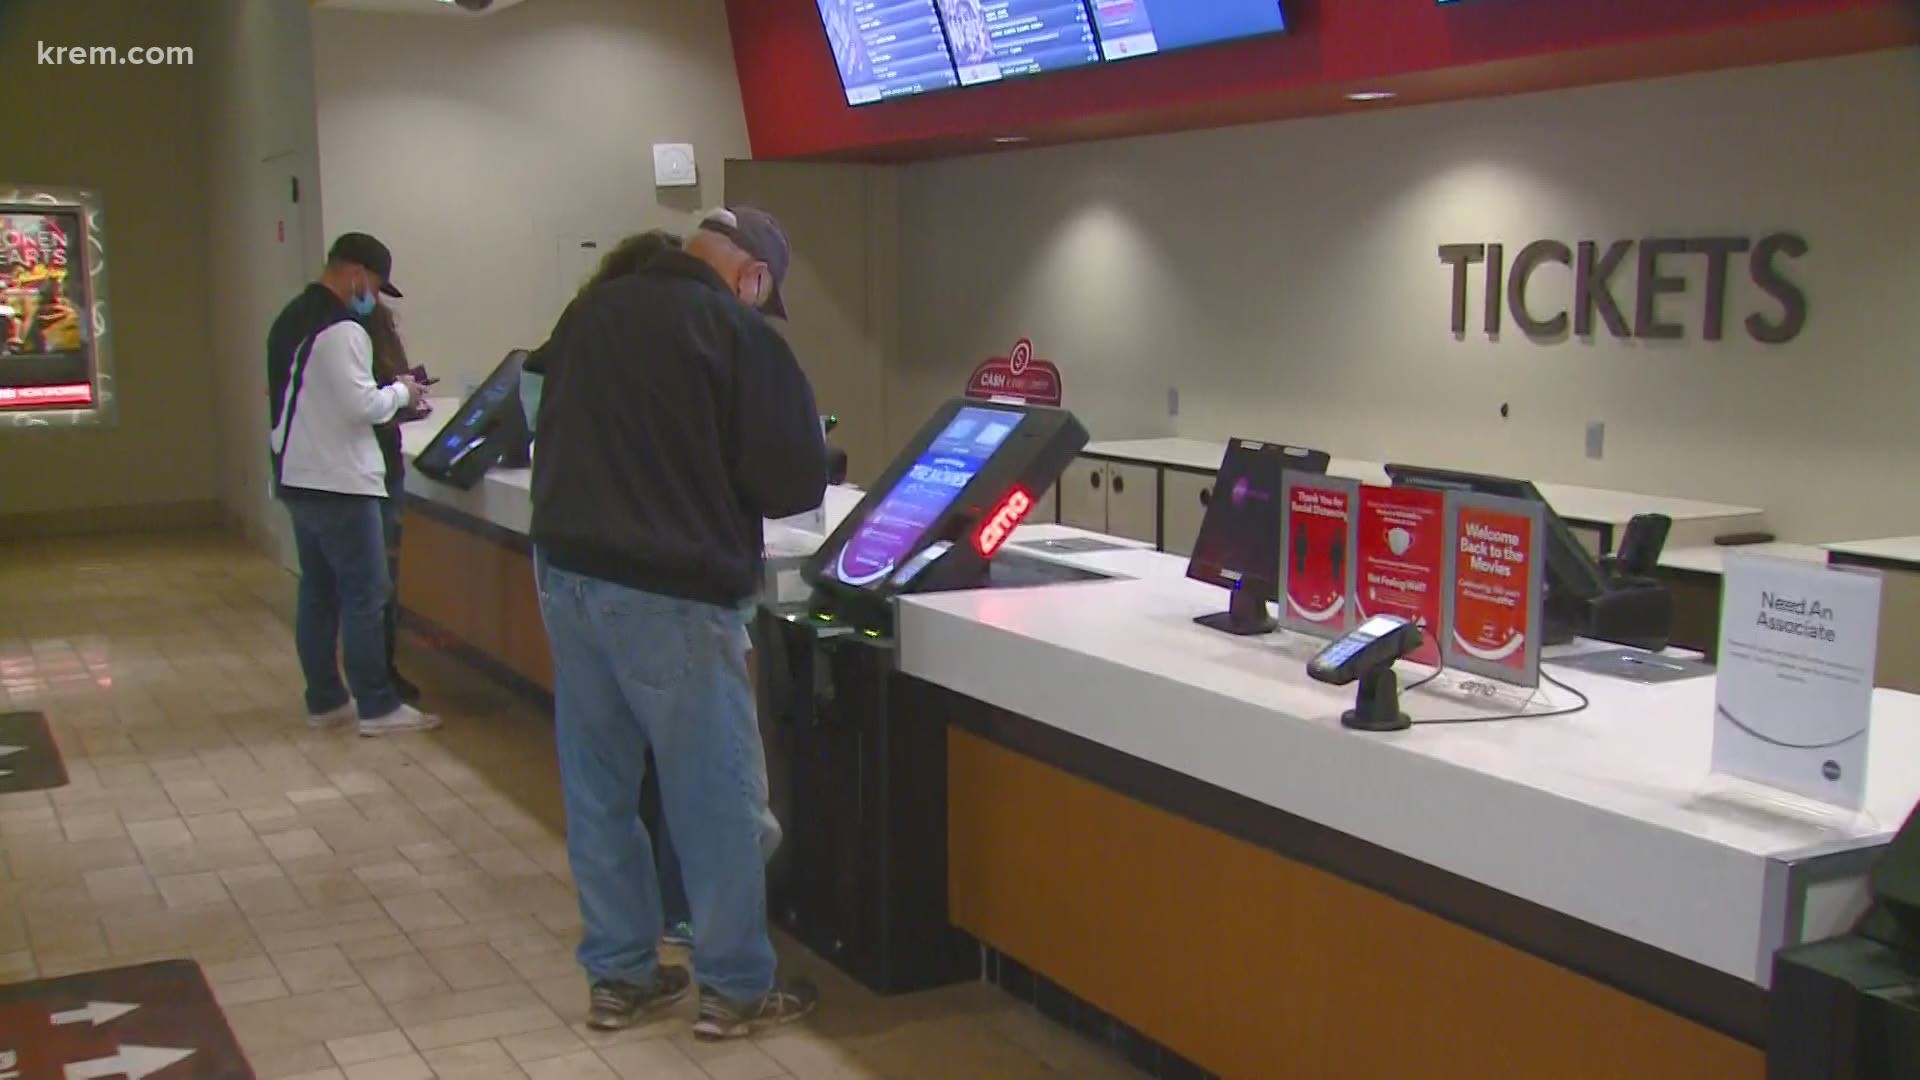 The movie theater in Spokane is reopening after Gov. Jay Inslee announced the loosening of coronavirus restrictions for restaurants and other businesses.